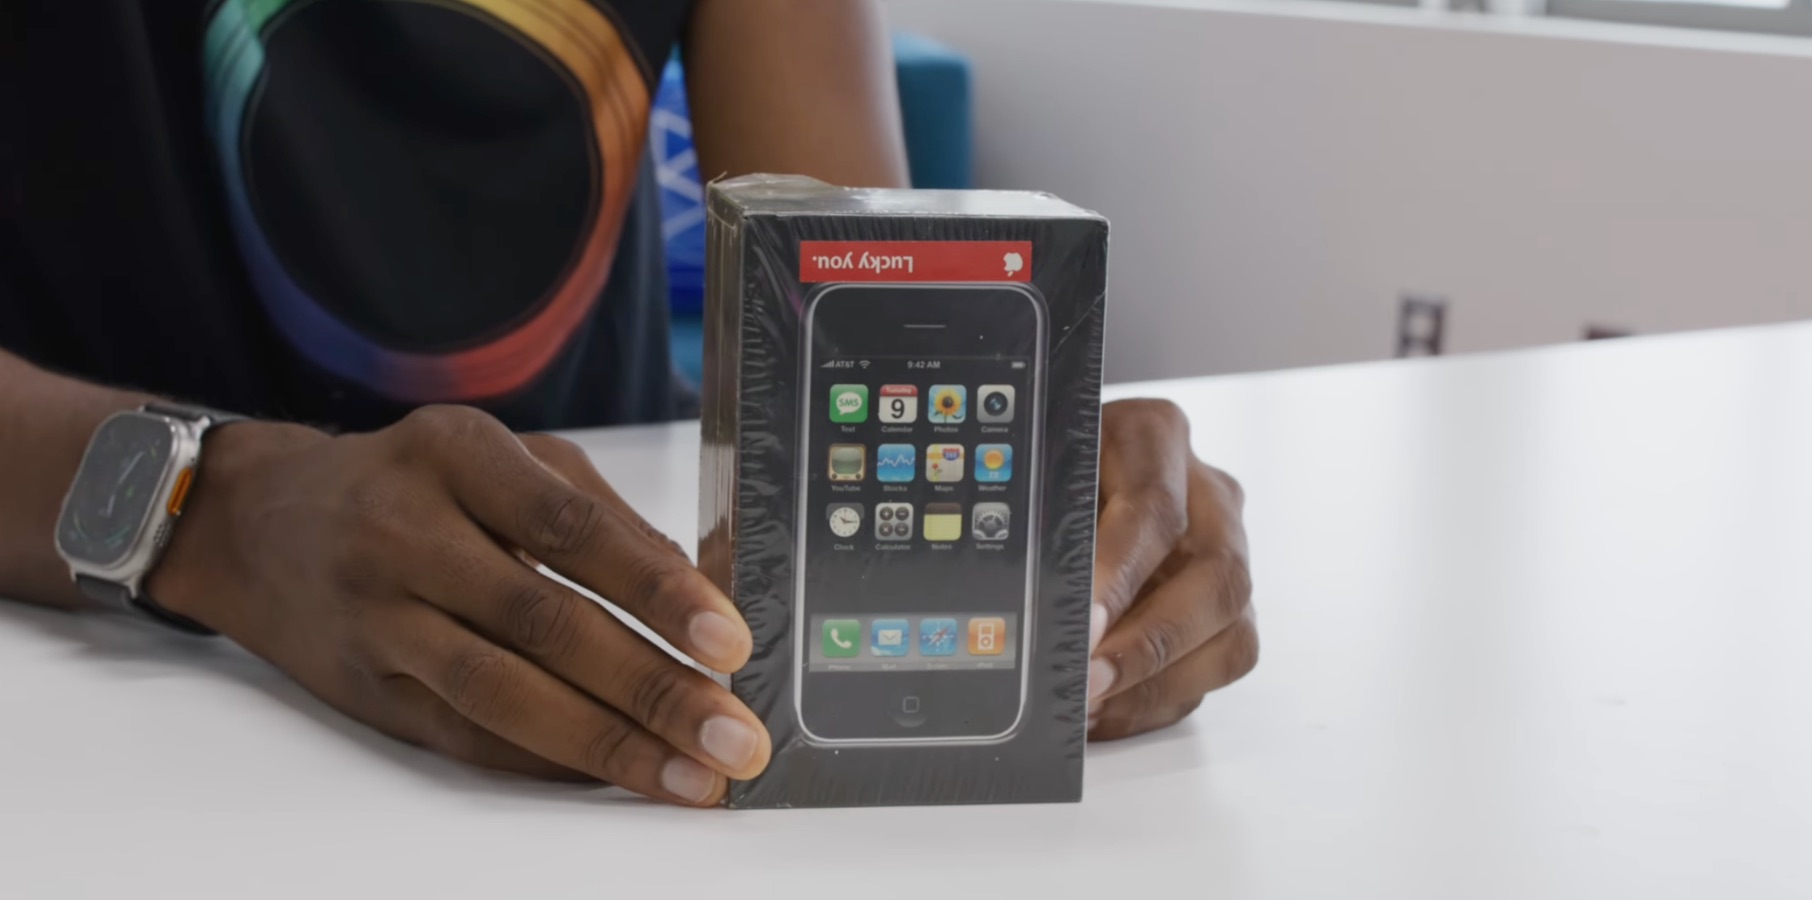 MKBHD bought an original iPhone for $40,000 – watch him unbox it